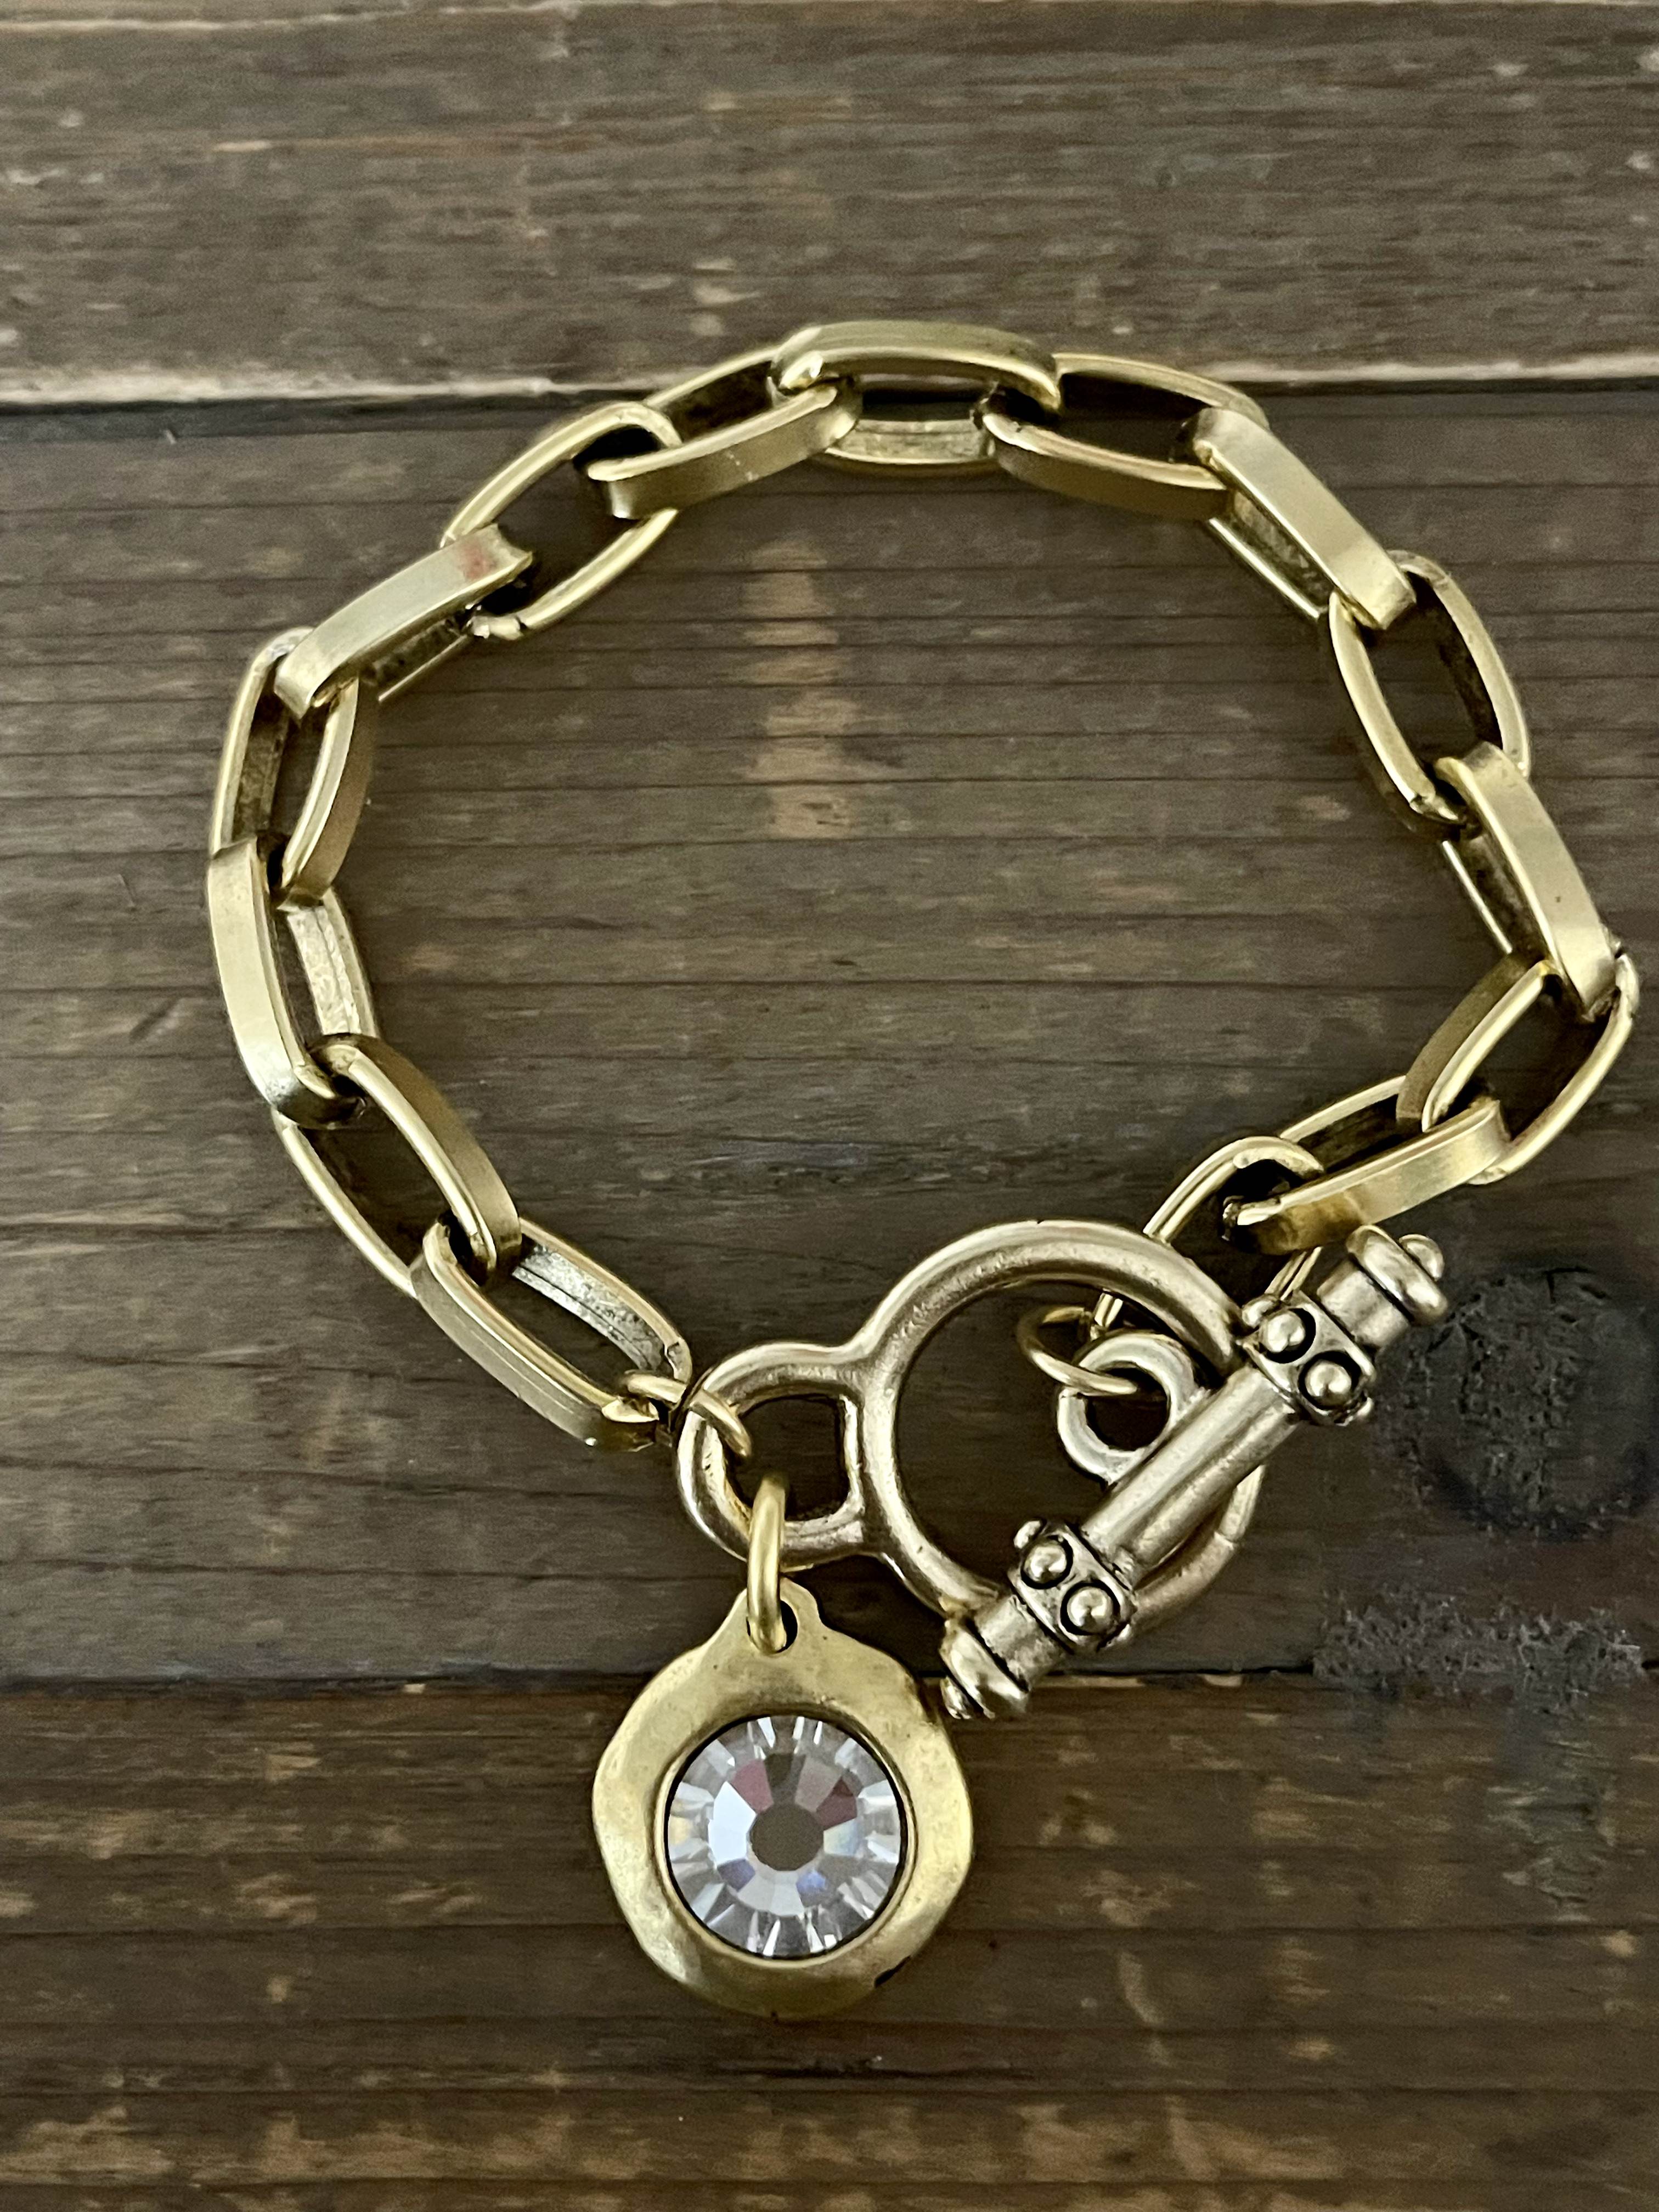 Gold Plated Chain and Toggle Bracelet with Swarovski Crystal Charm 7.5"